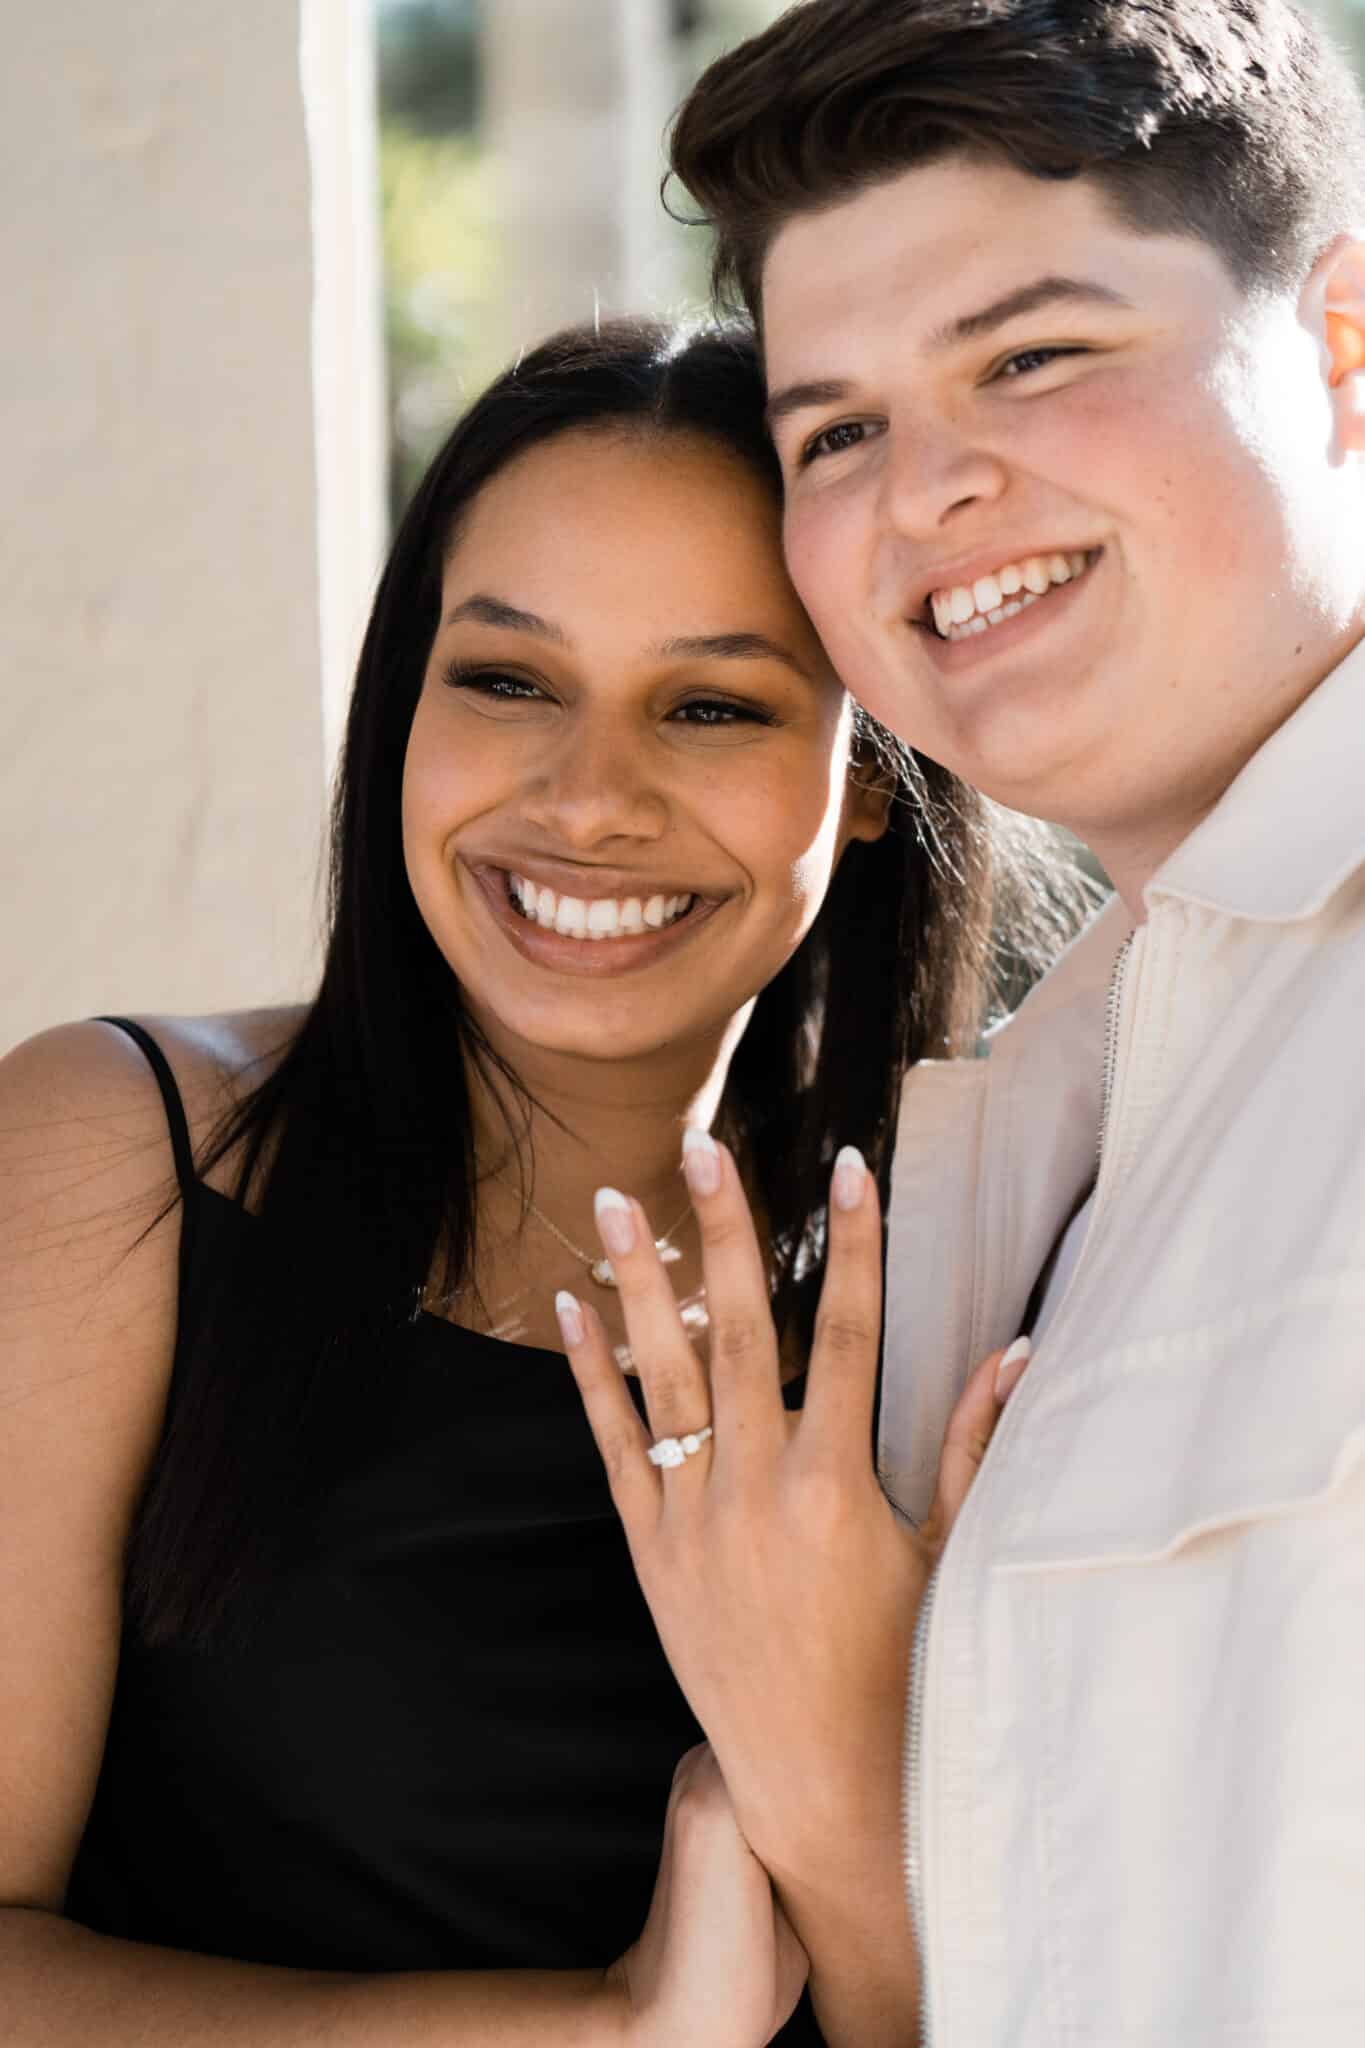 couple stand together smiling big while girl holds up hand in front of them showing her new engagement ring off